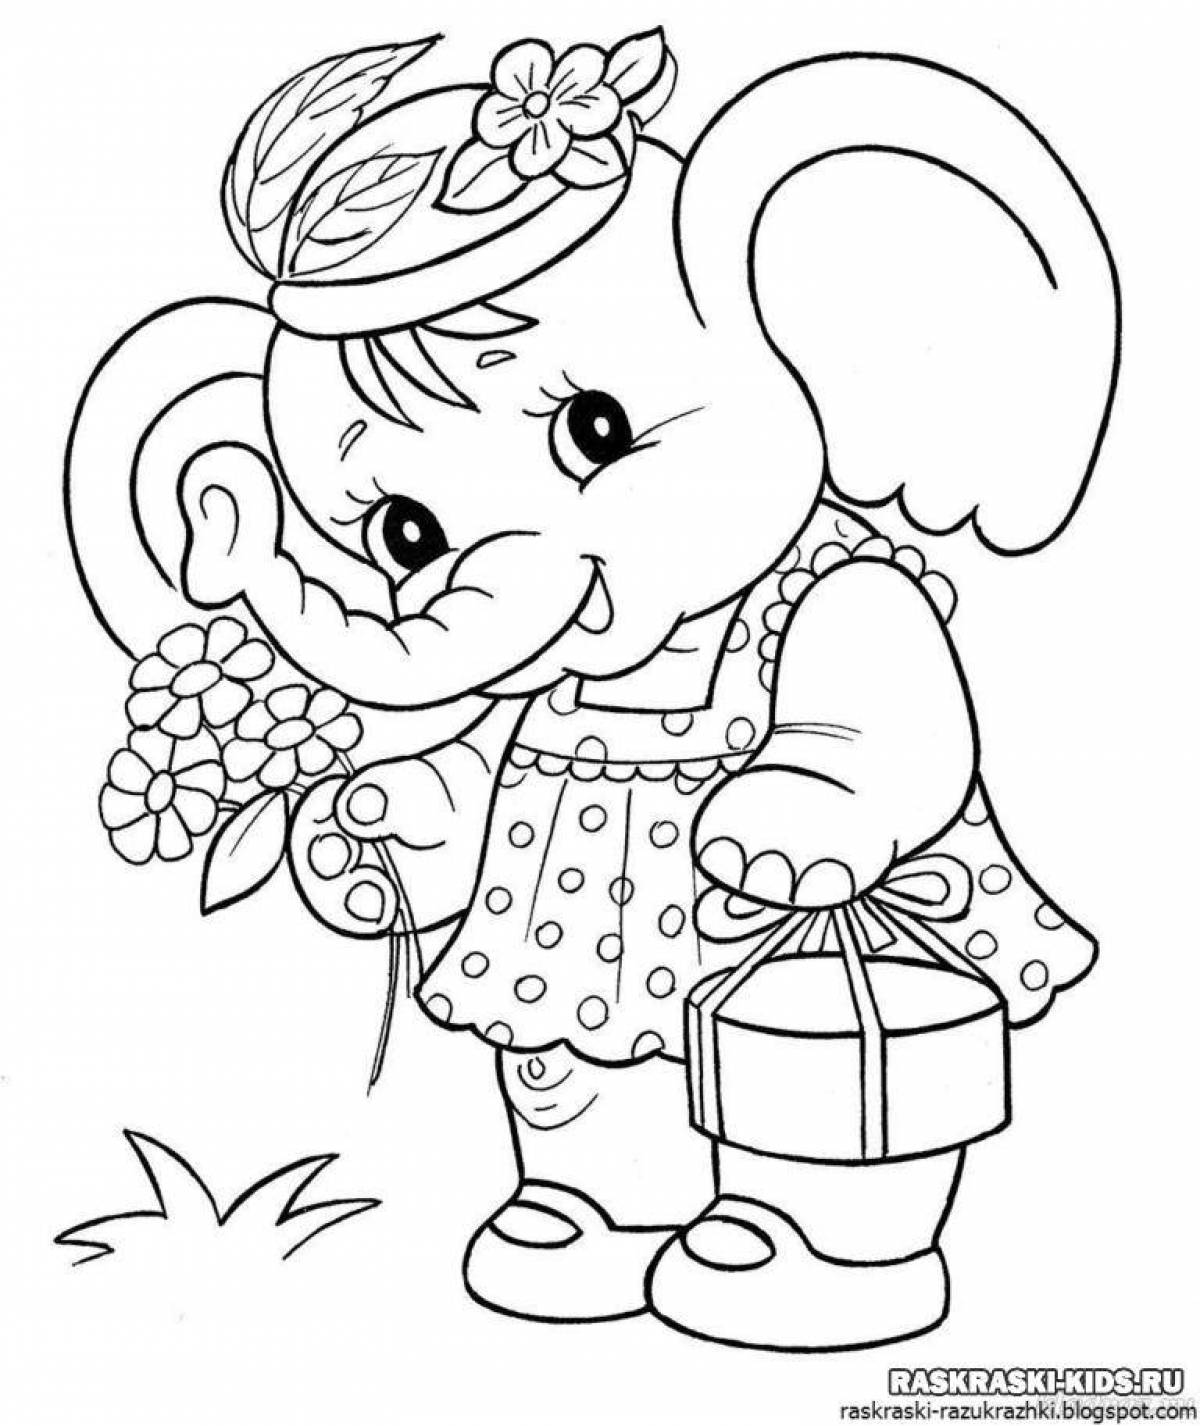 Color-magic coloring page for preschoolers 4-5 years old